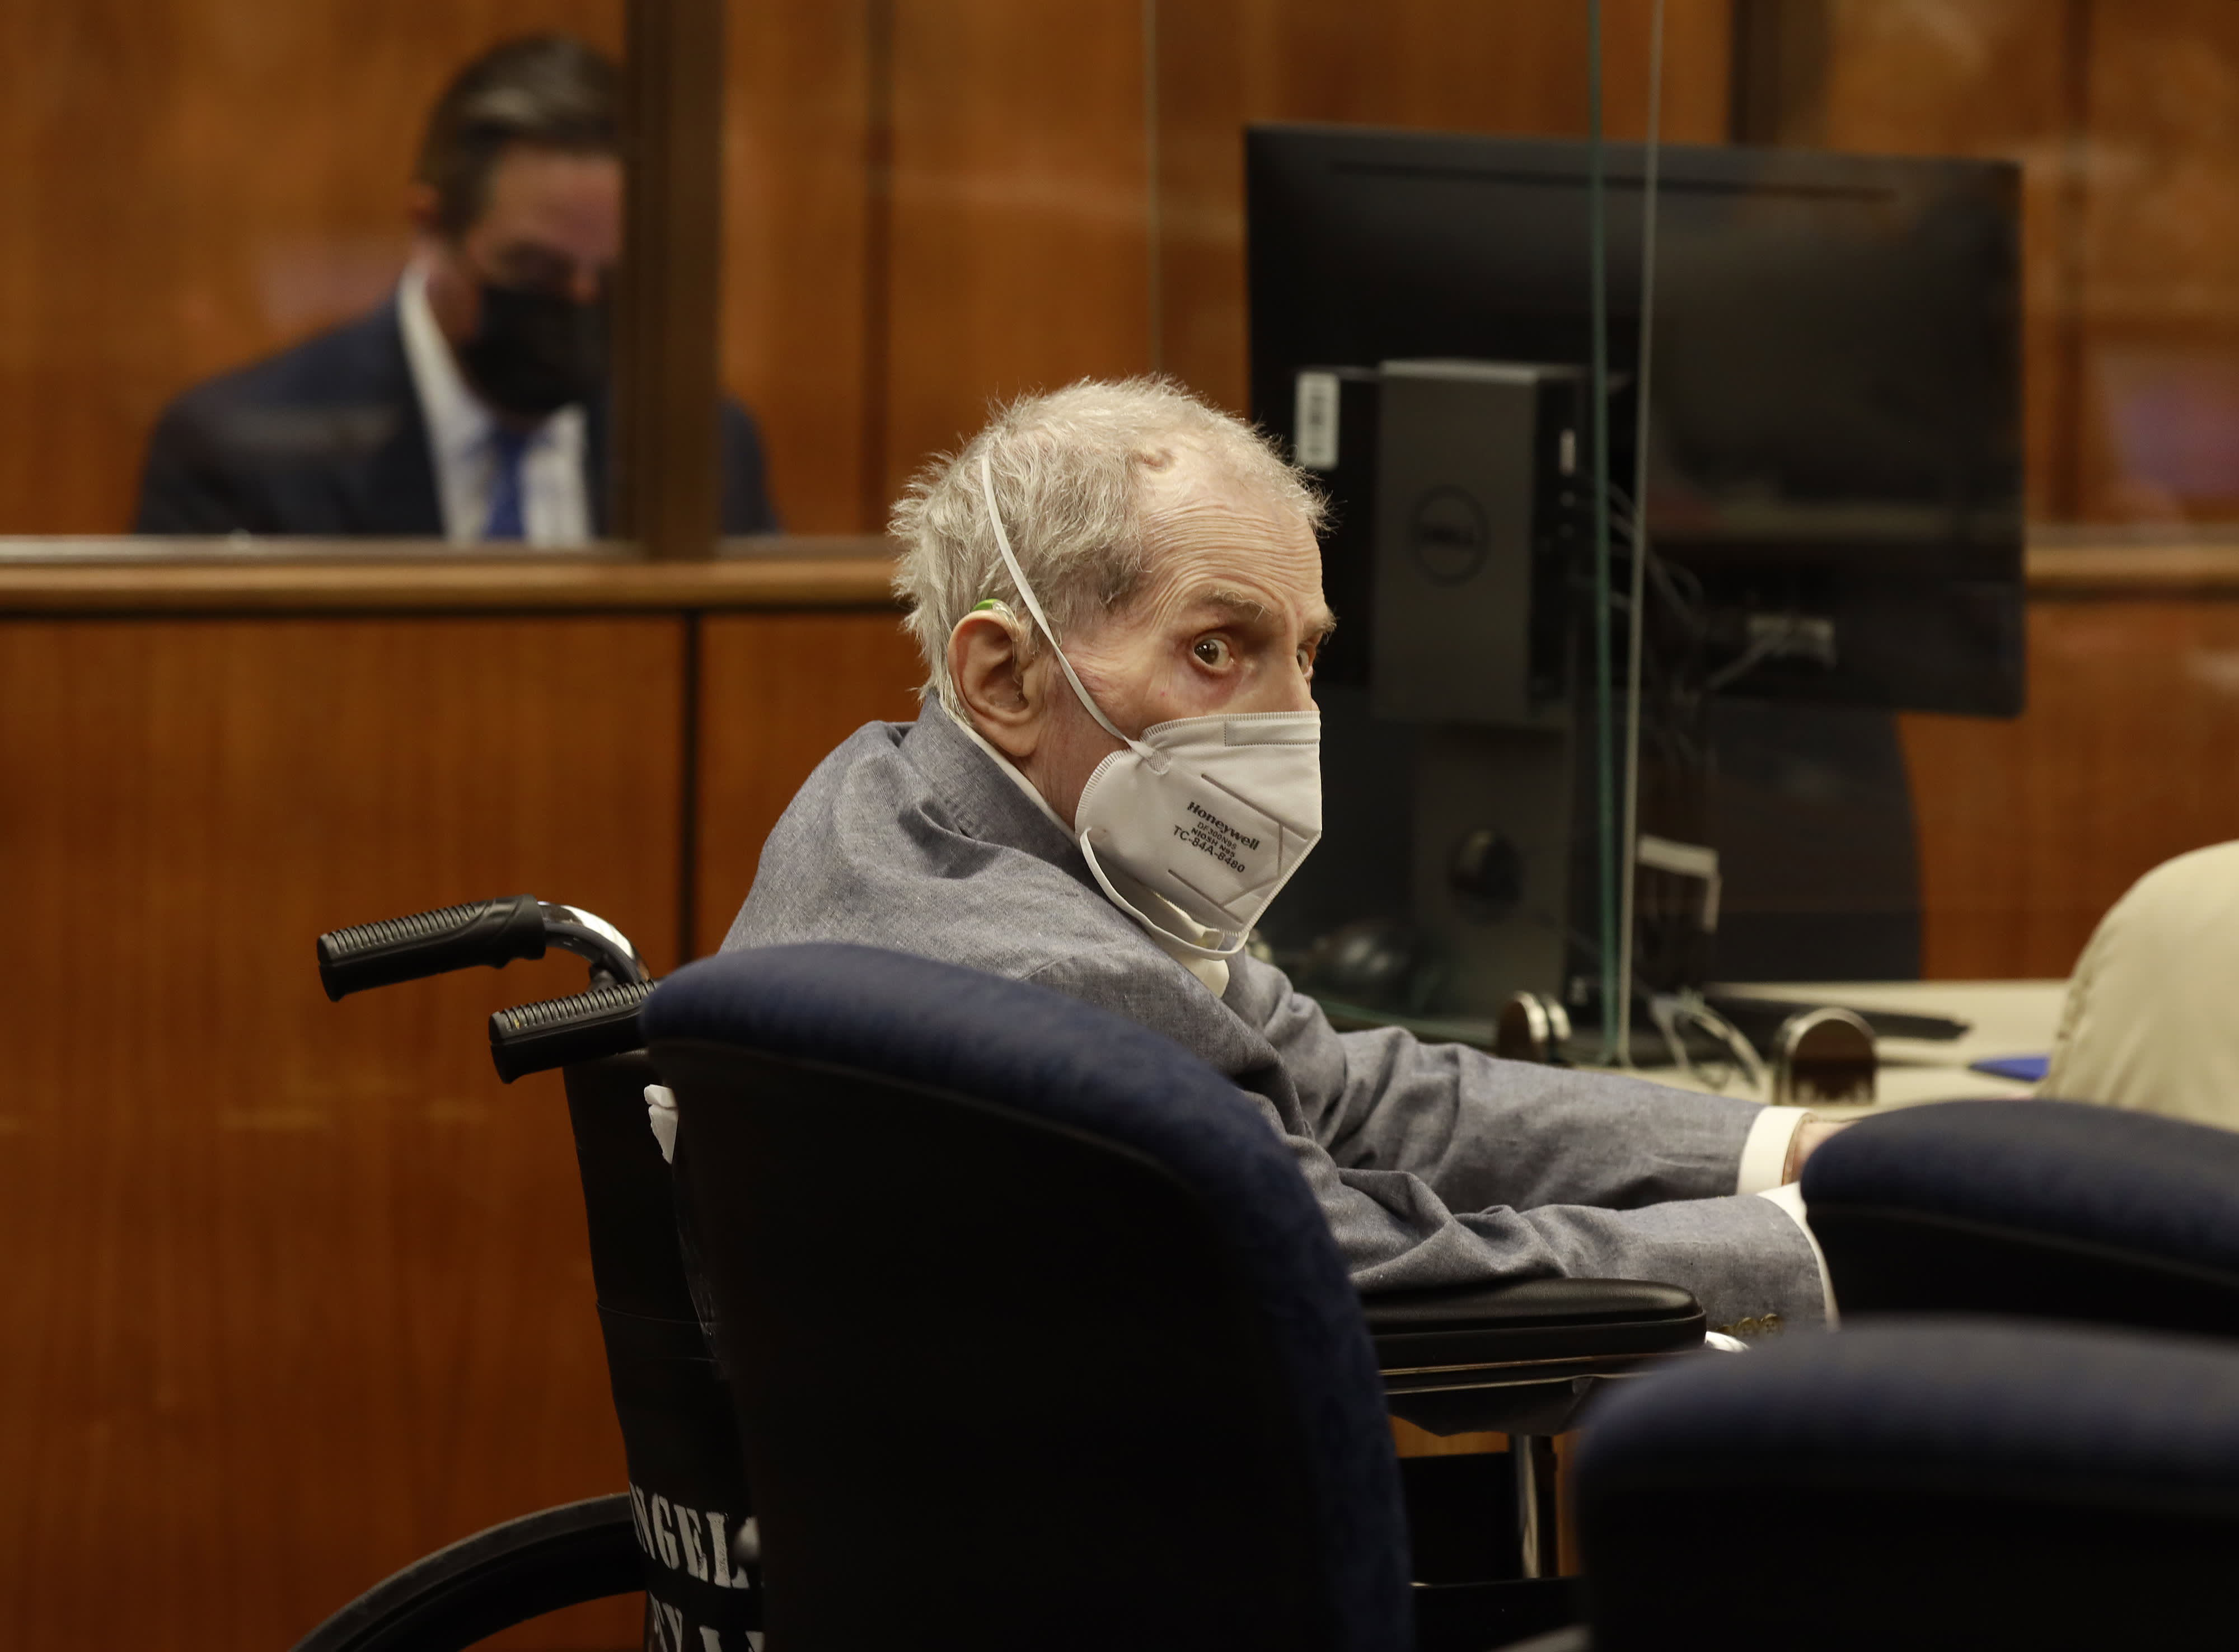 New York real estate heir Robert Durst is hospitalized with Covid days after life sentence, his attorney says - CNBC